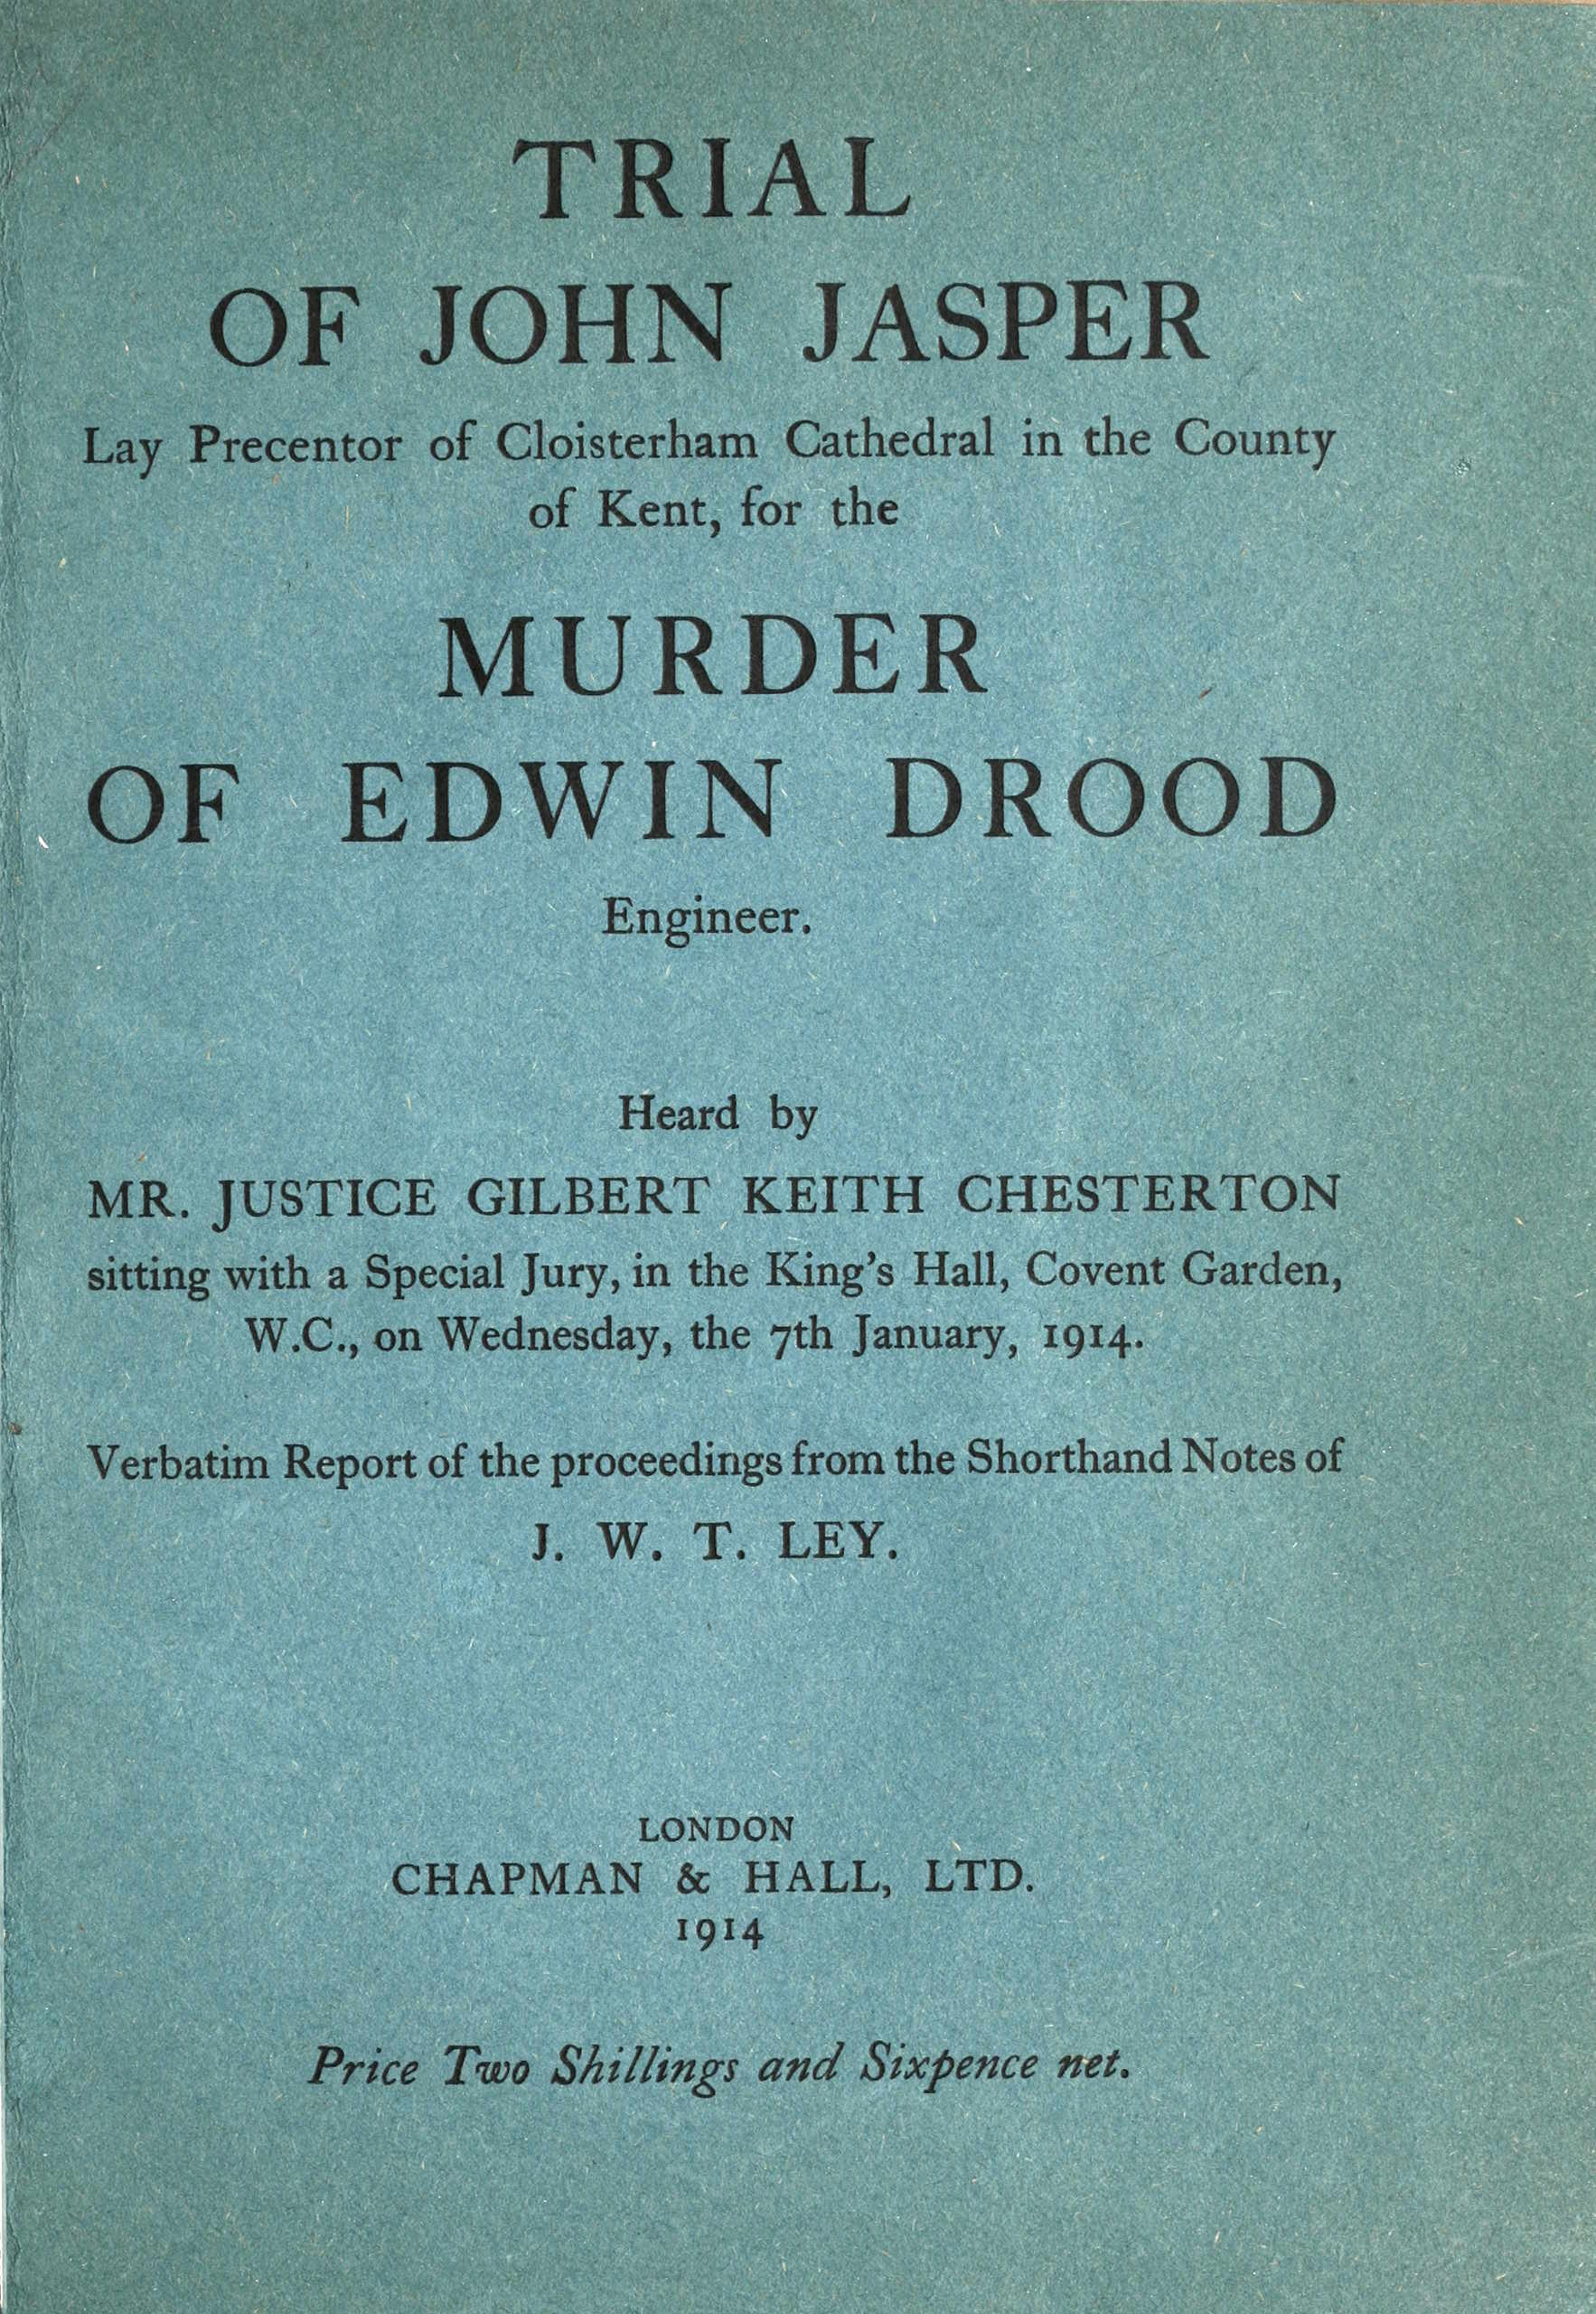 Trial of John Jasper, lay precentor of Cloisterham Cathedral in the County of Kent, for the murder of Edwin Drood, engineer